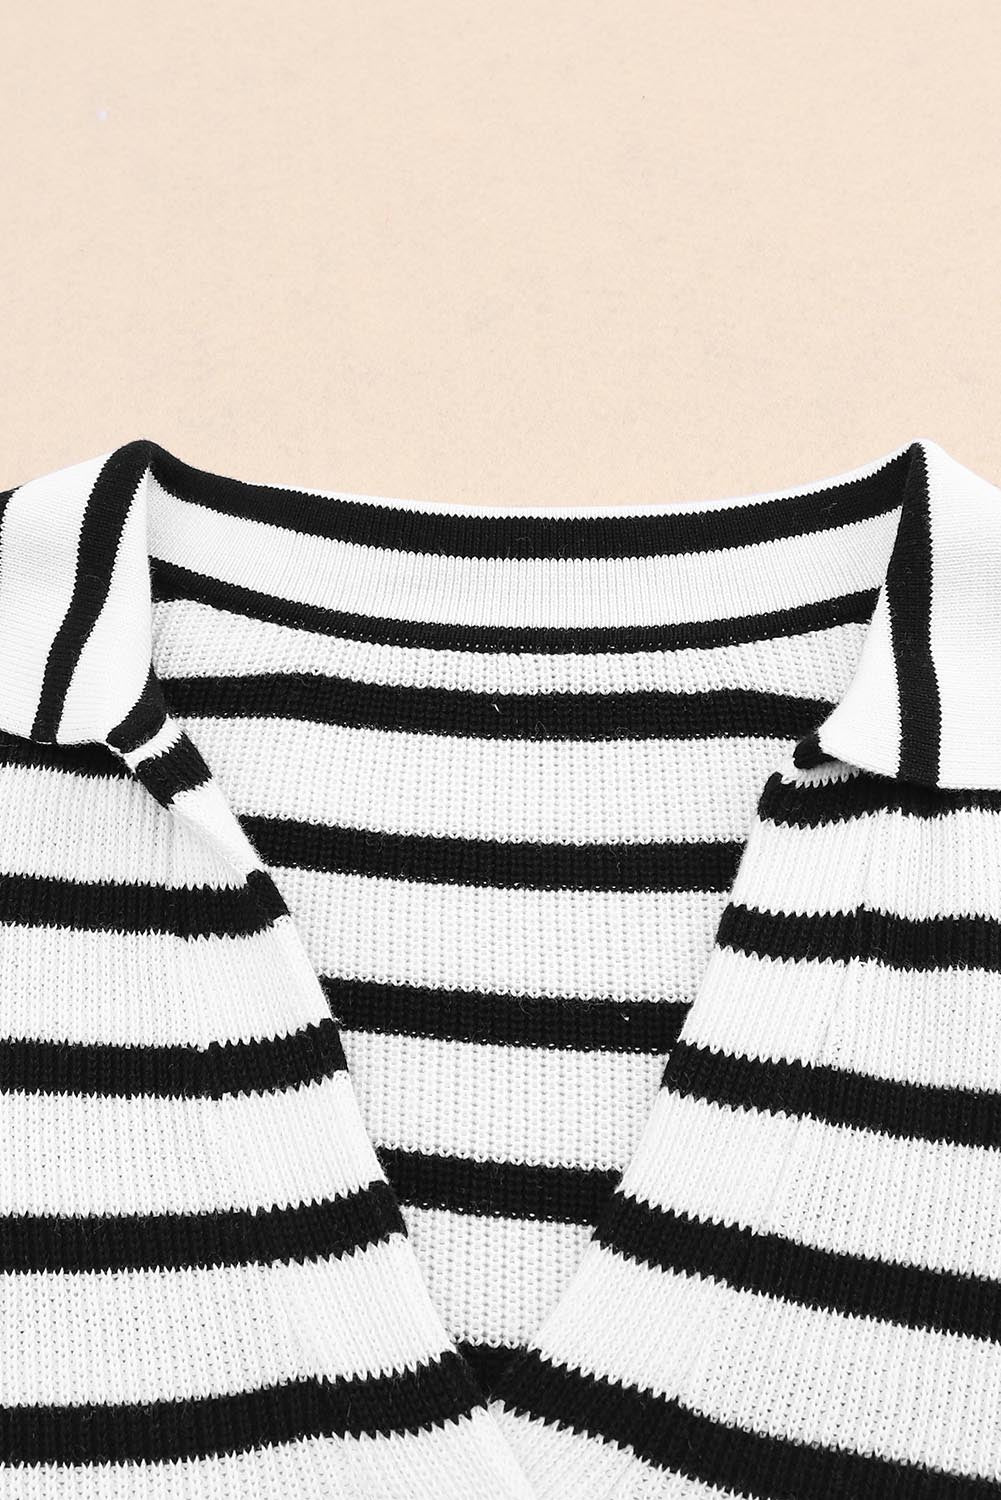 Stripe Collared V Neck Lightweight Knit Casual Sweater